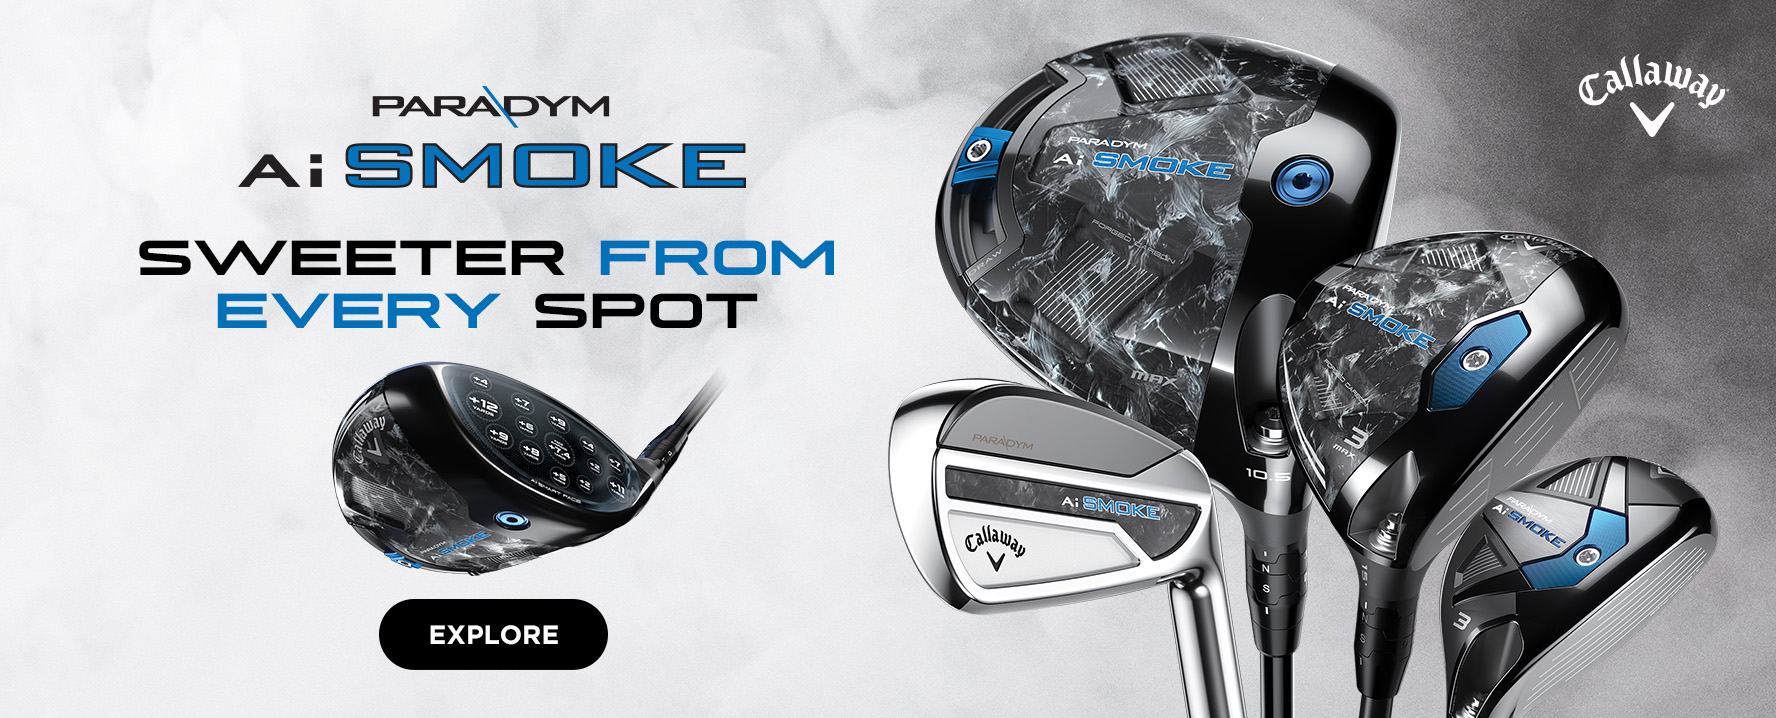 CALLAWAY GOLF ANNOUNCES NEW PARADYM AI SMOKE WOODS AND IRONS